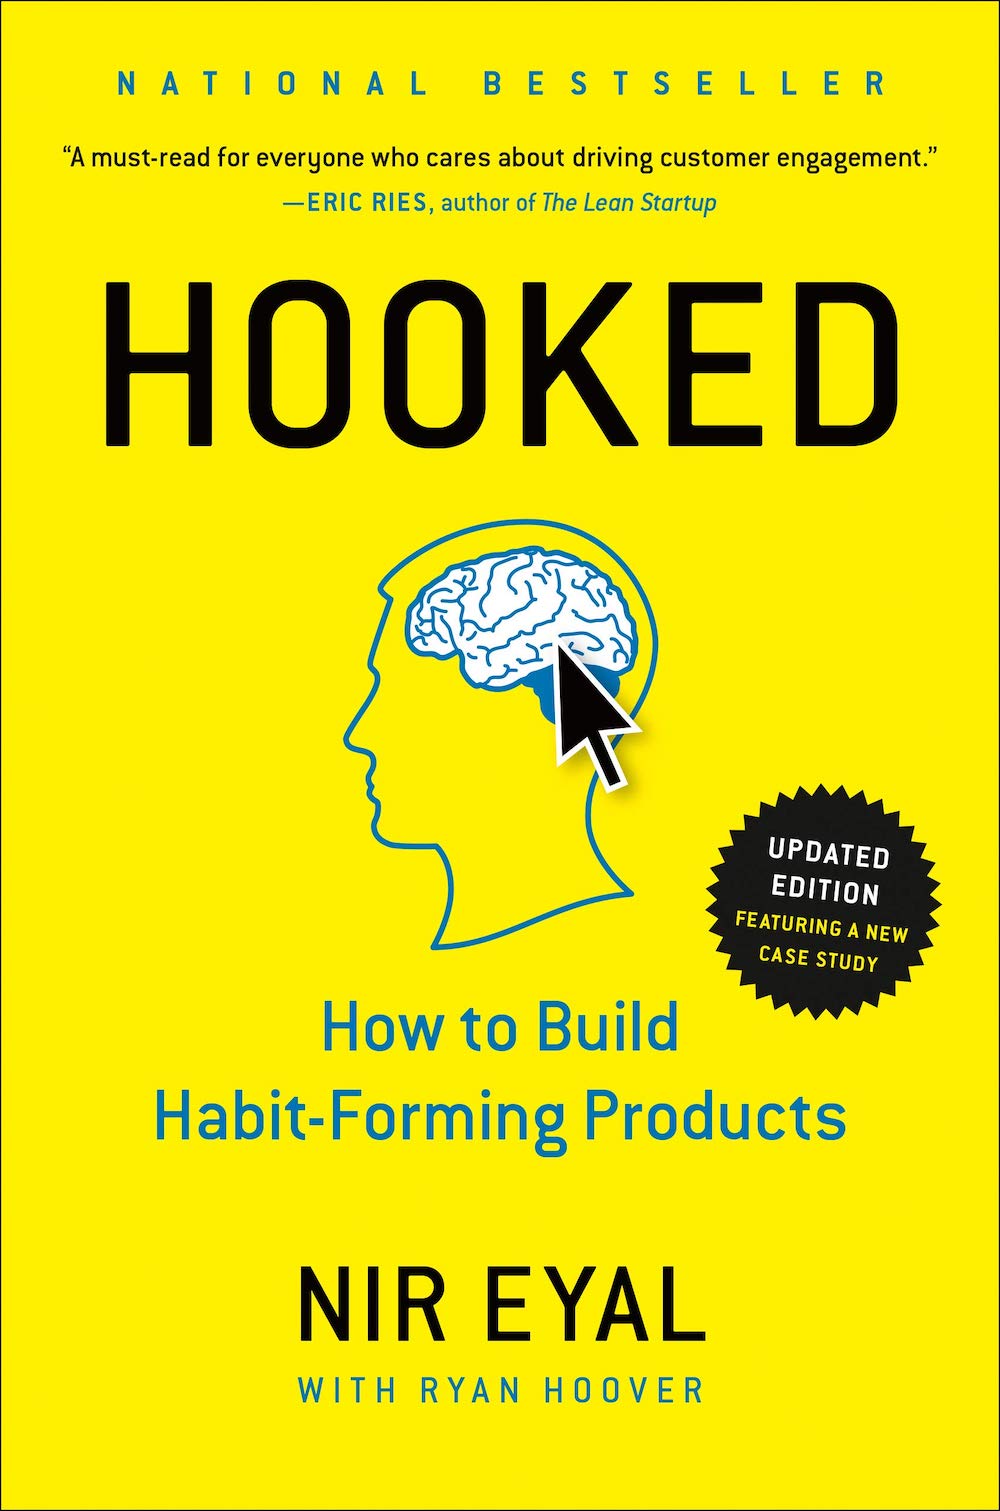 The cover of Hooked